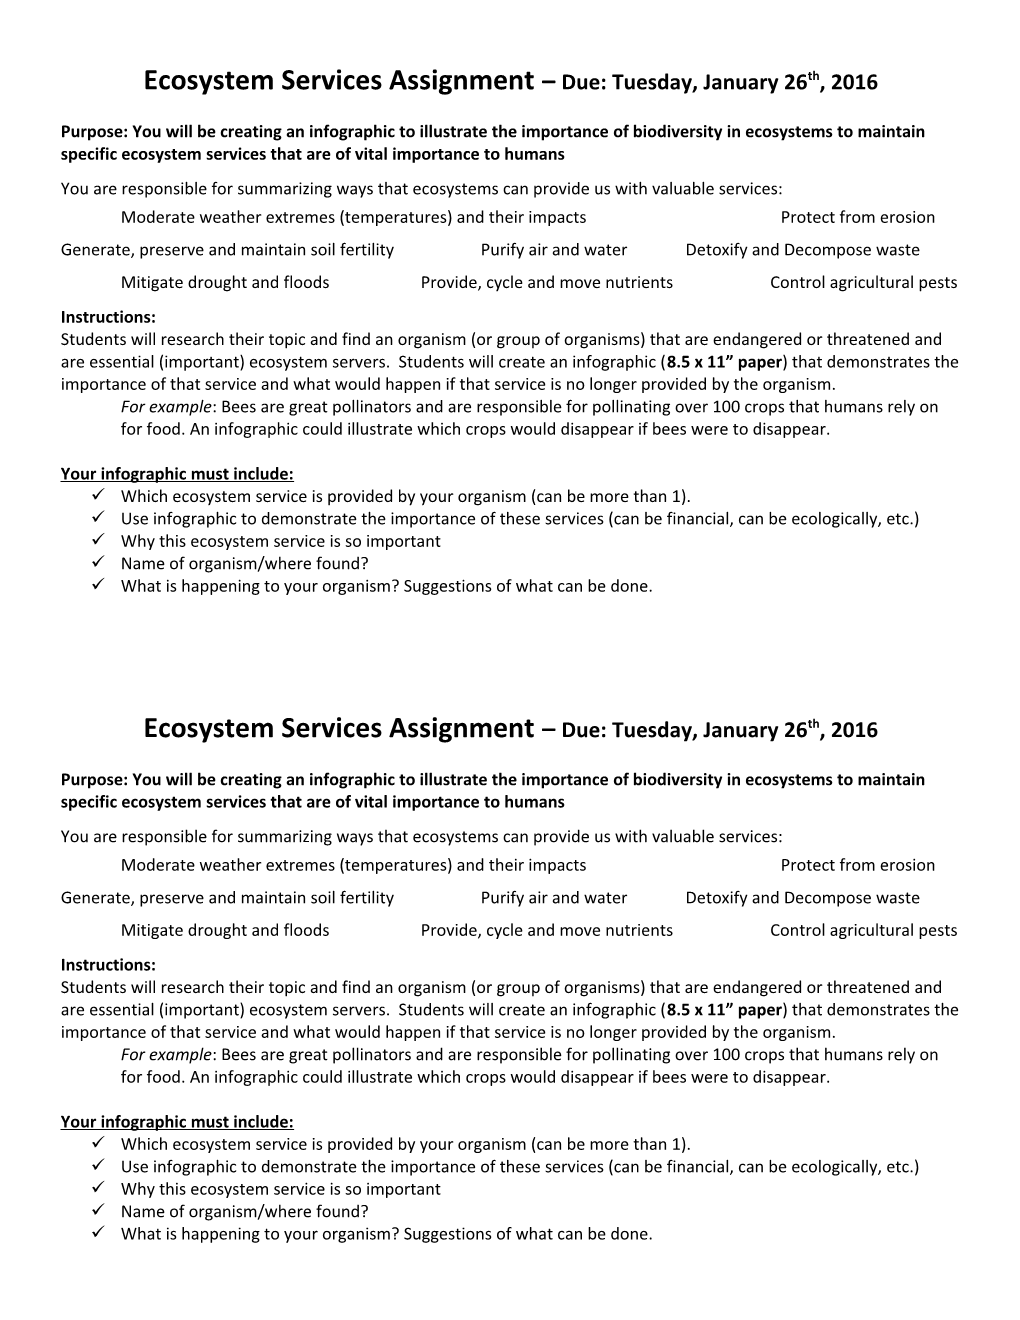 Ecosystem Services Assignment Due: Tuesday, January 26Th, 2016